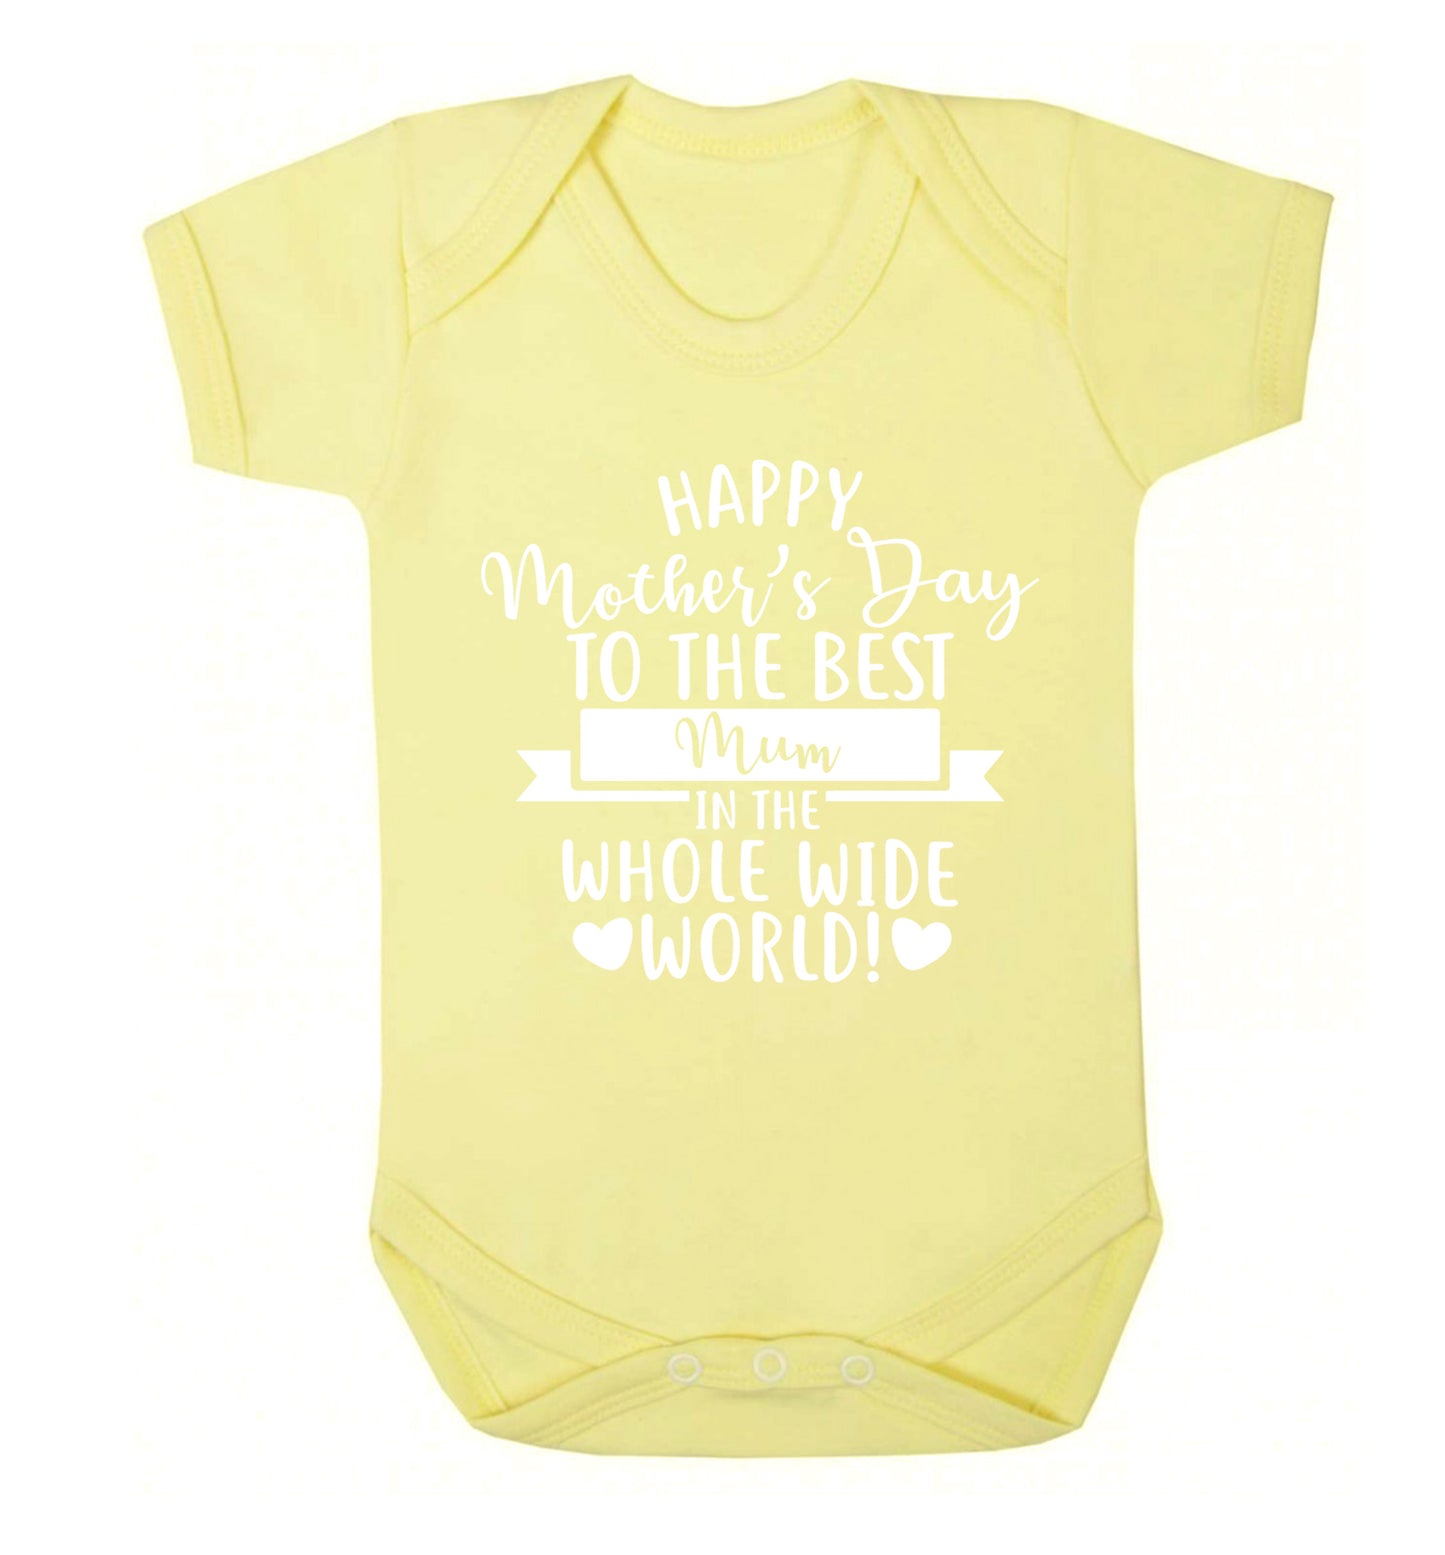 Happy Mother's Day to the best mum in the whole wide world! Baby Vest pale yellow 18-24 months